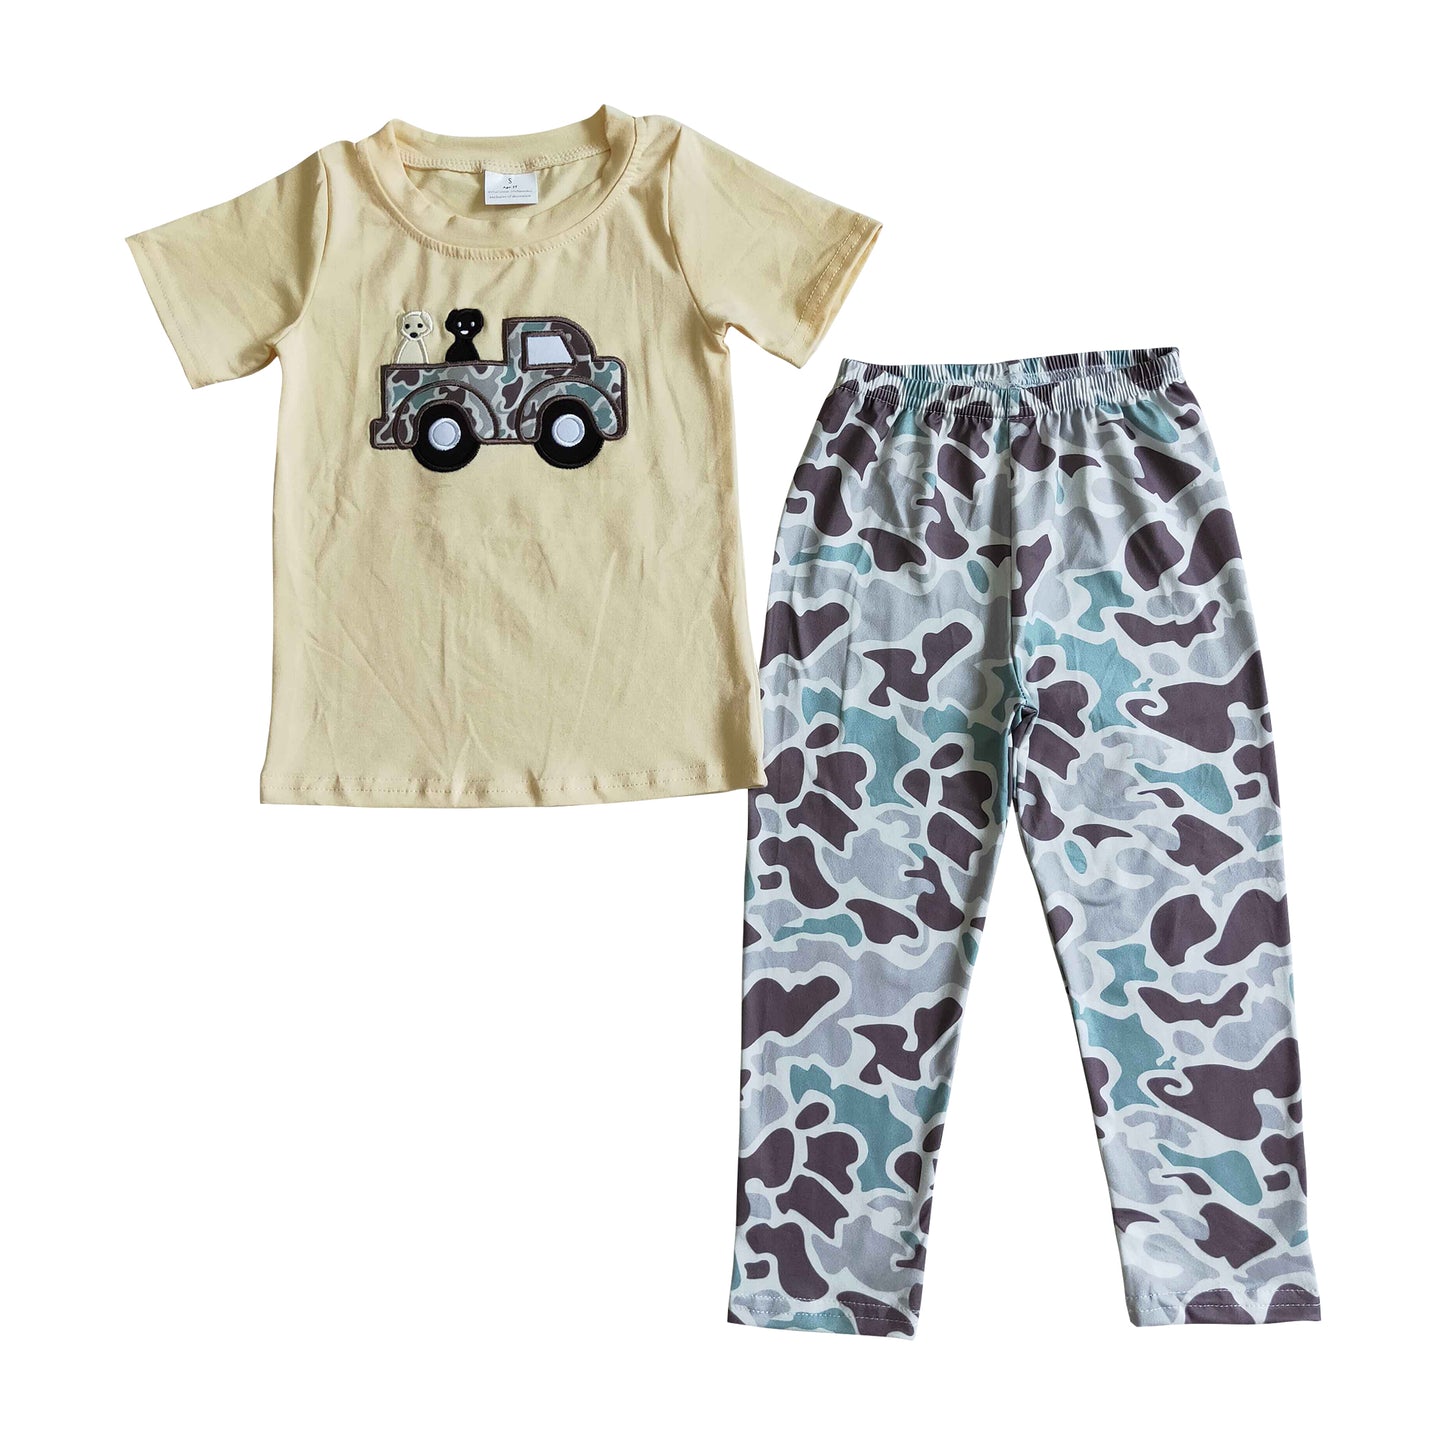 boy short sleeve embroidery outfit camo pants set